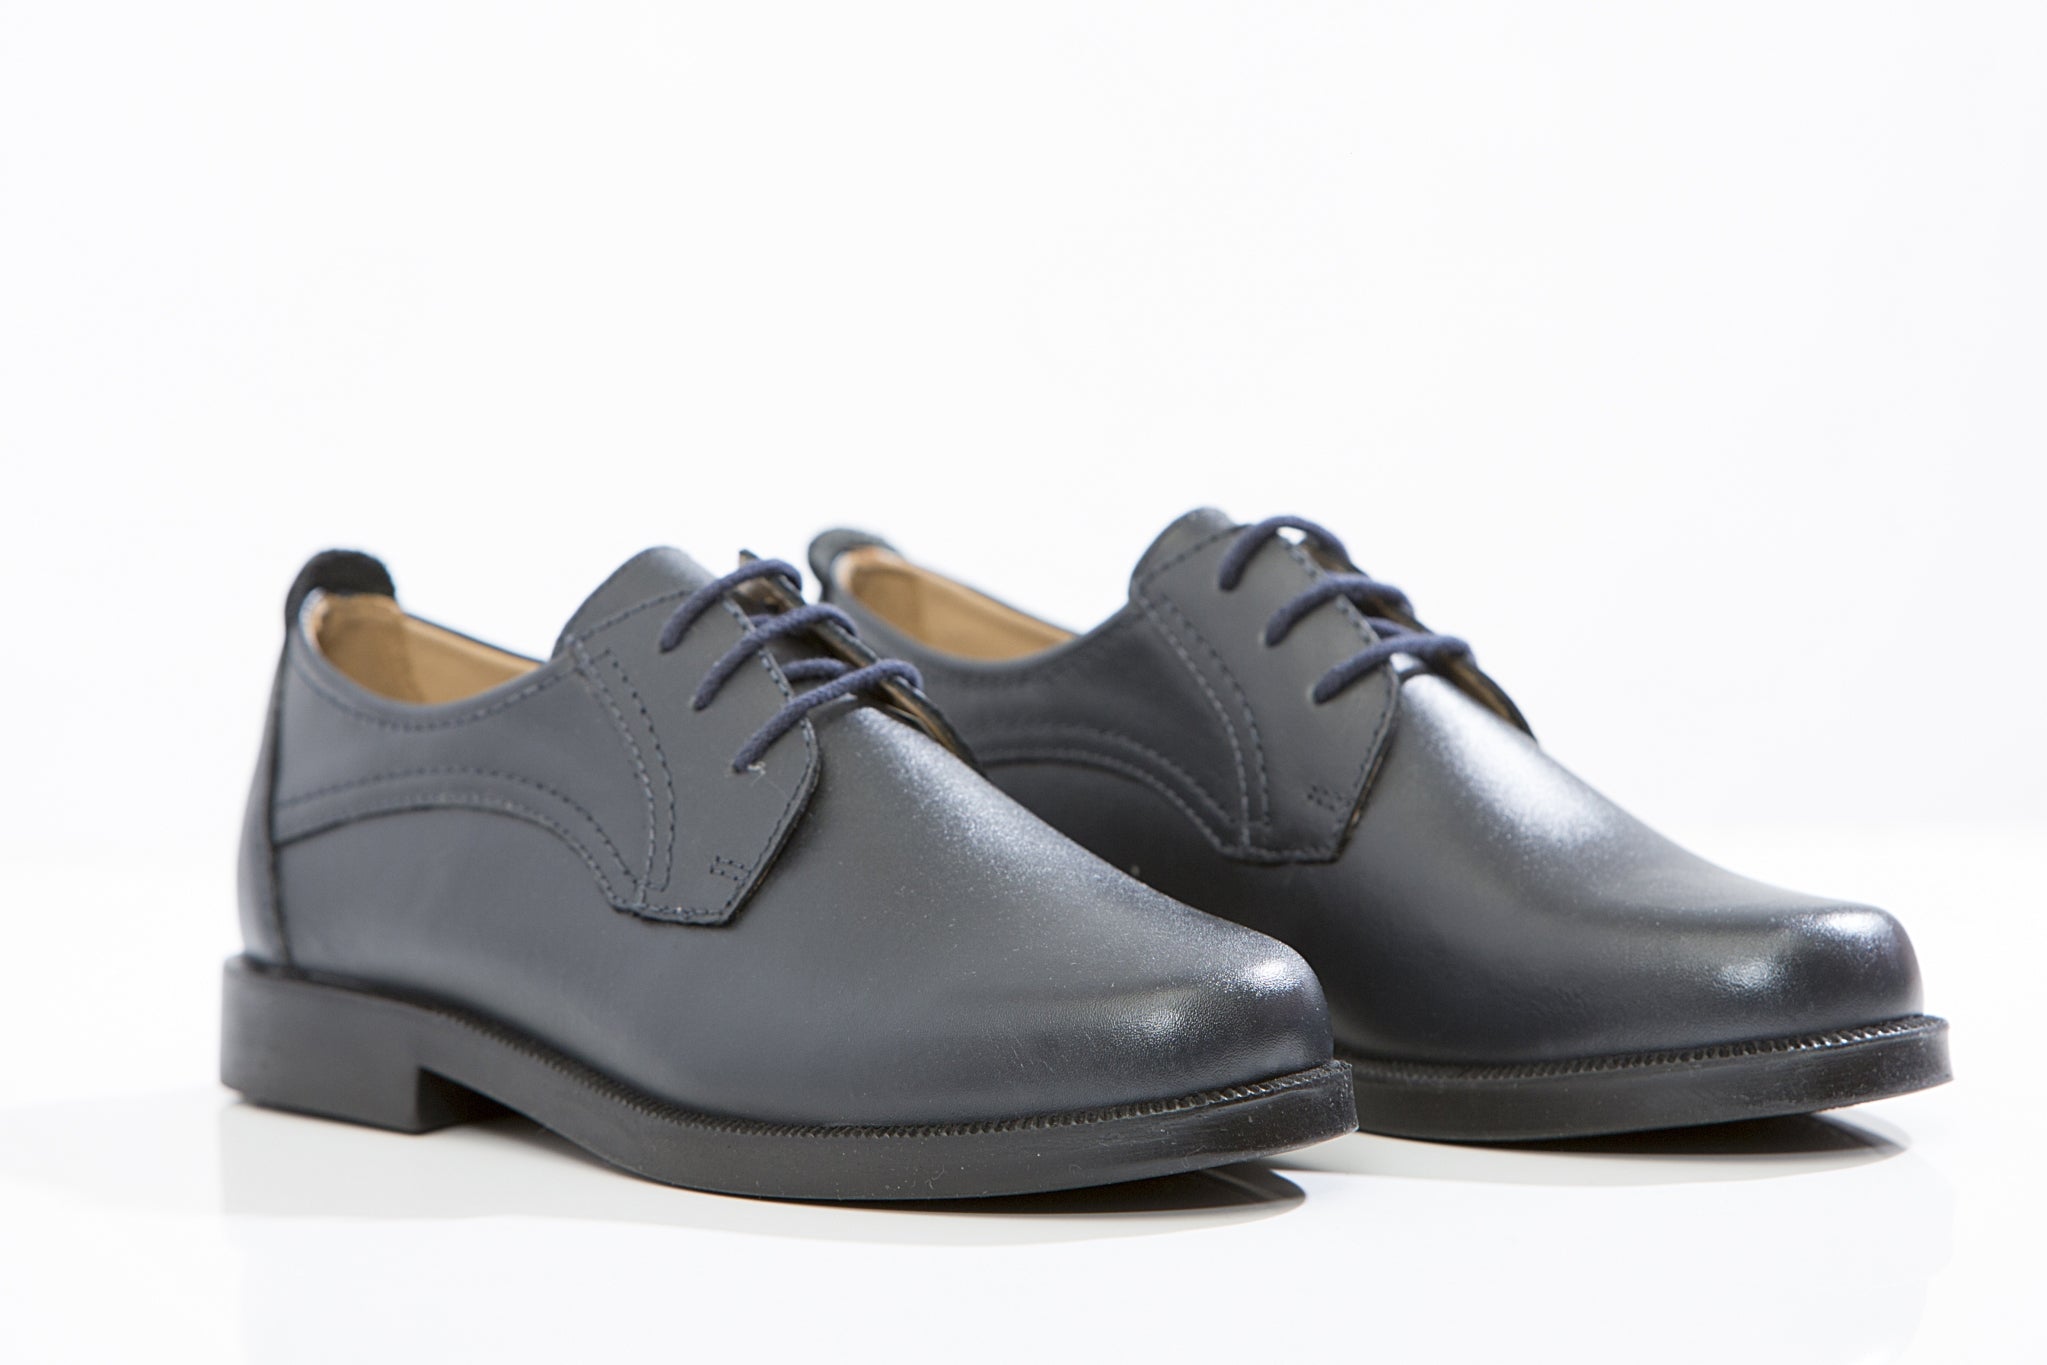 lark and finch shoes price off 61 